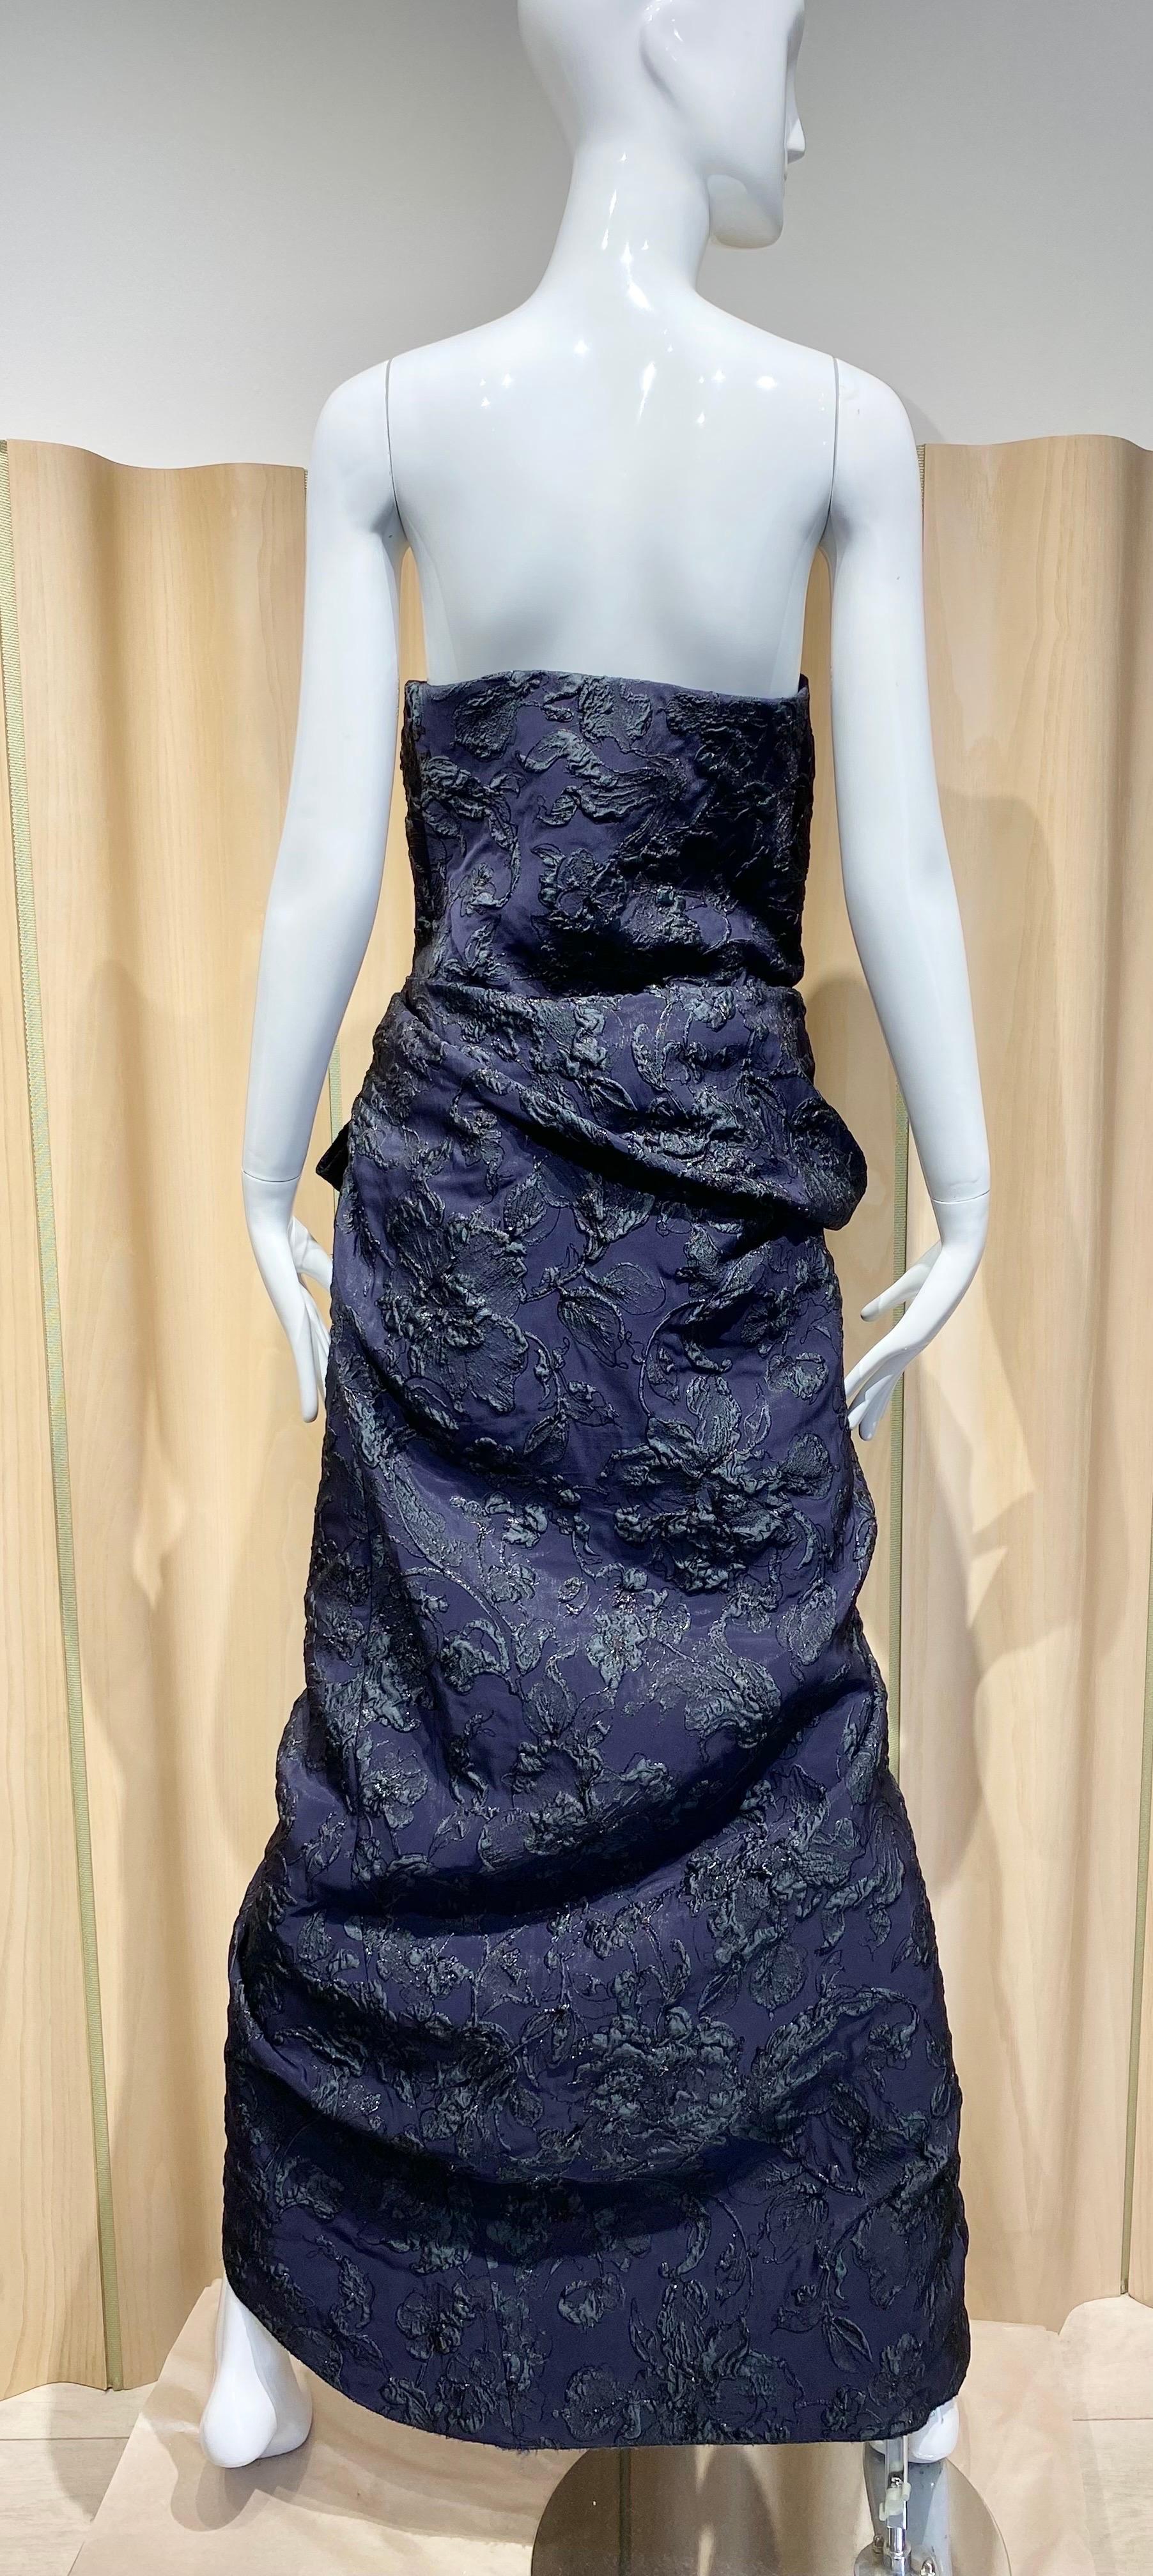 Lanvin strapless silk brocade navy blue and dark grey metallic cocktail gown with side bow  by Alber Elbaz.  Perfect for cocktail party or wedding.

Marked 40 Fr/ Fit US size 6/8
Measurement: 
Bust  32” stretch to 35” / Waist 30” /Hip 42” / L 54”